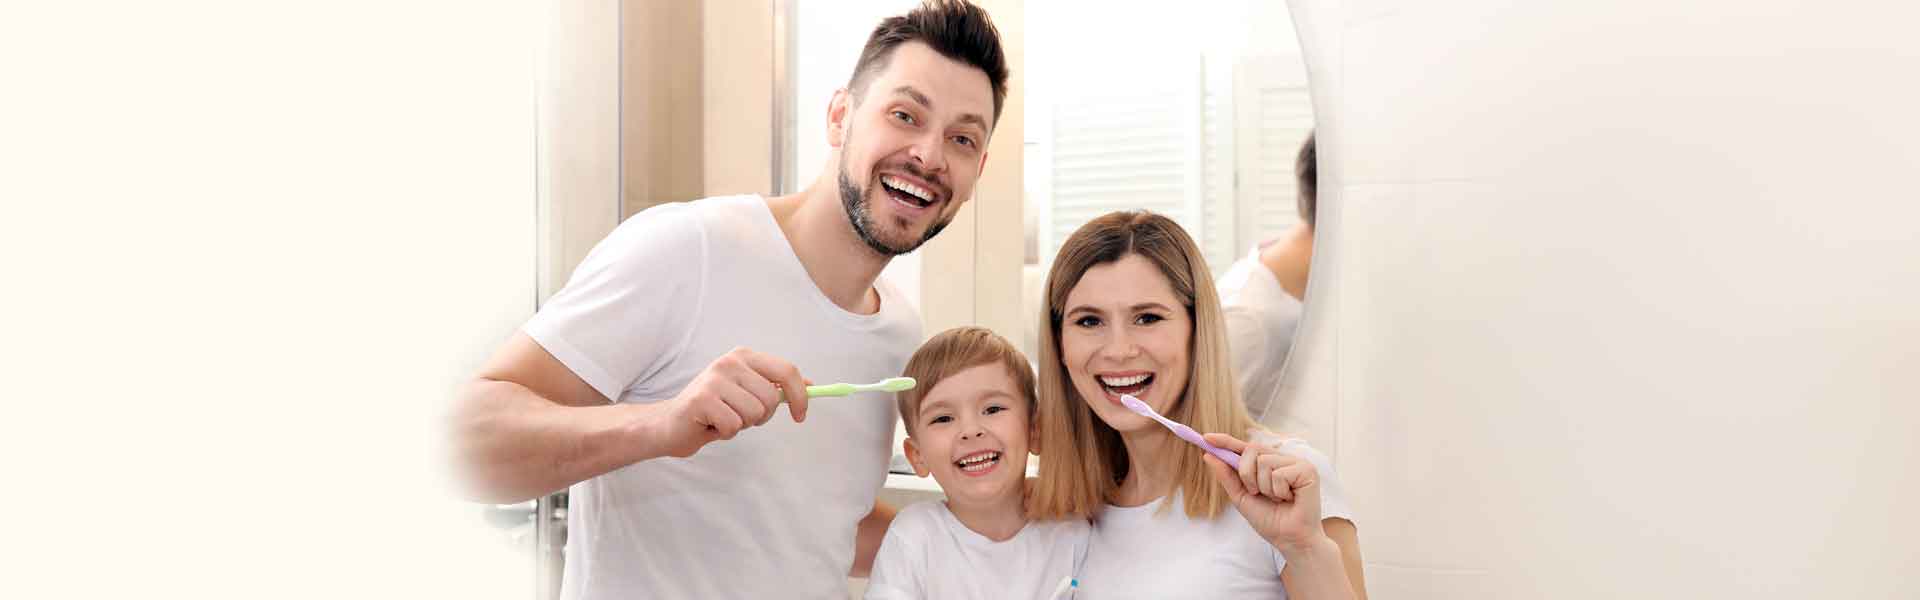 Qualities Of Family Dental Care You Should Look For